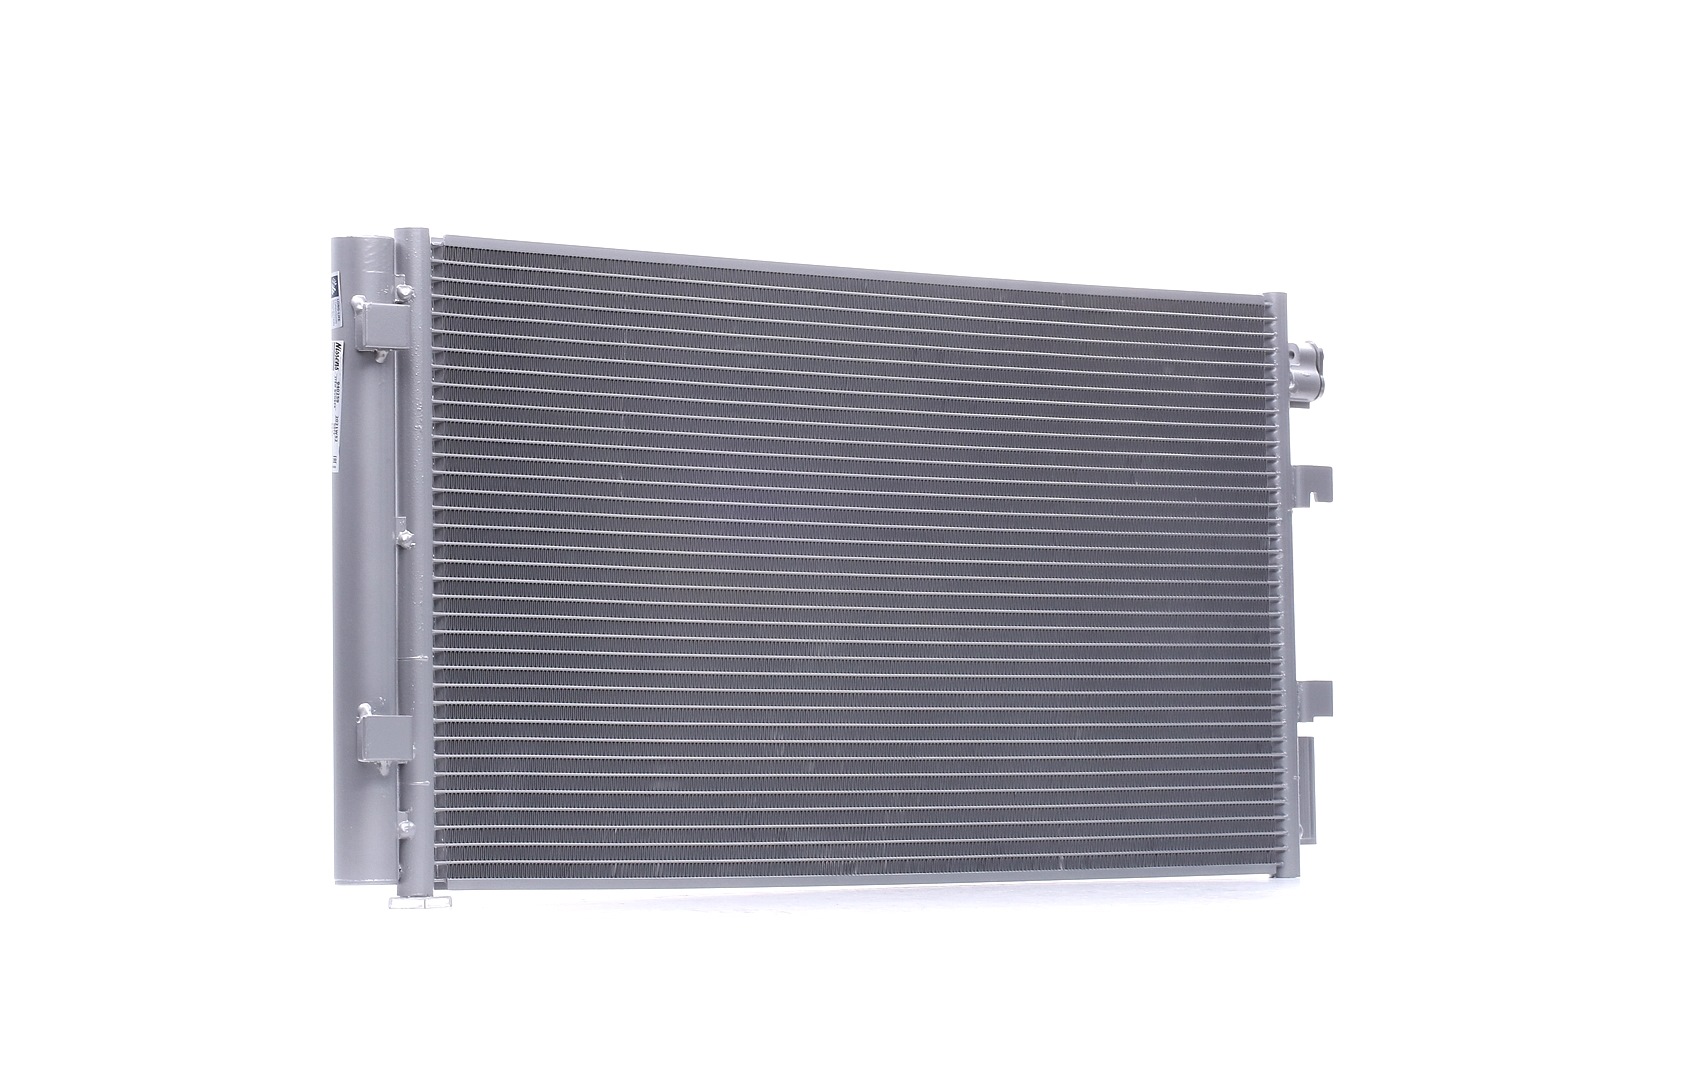 Renault Air conditioning condenser NISSENS 940259 at a good price